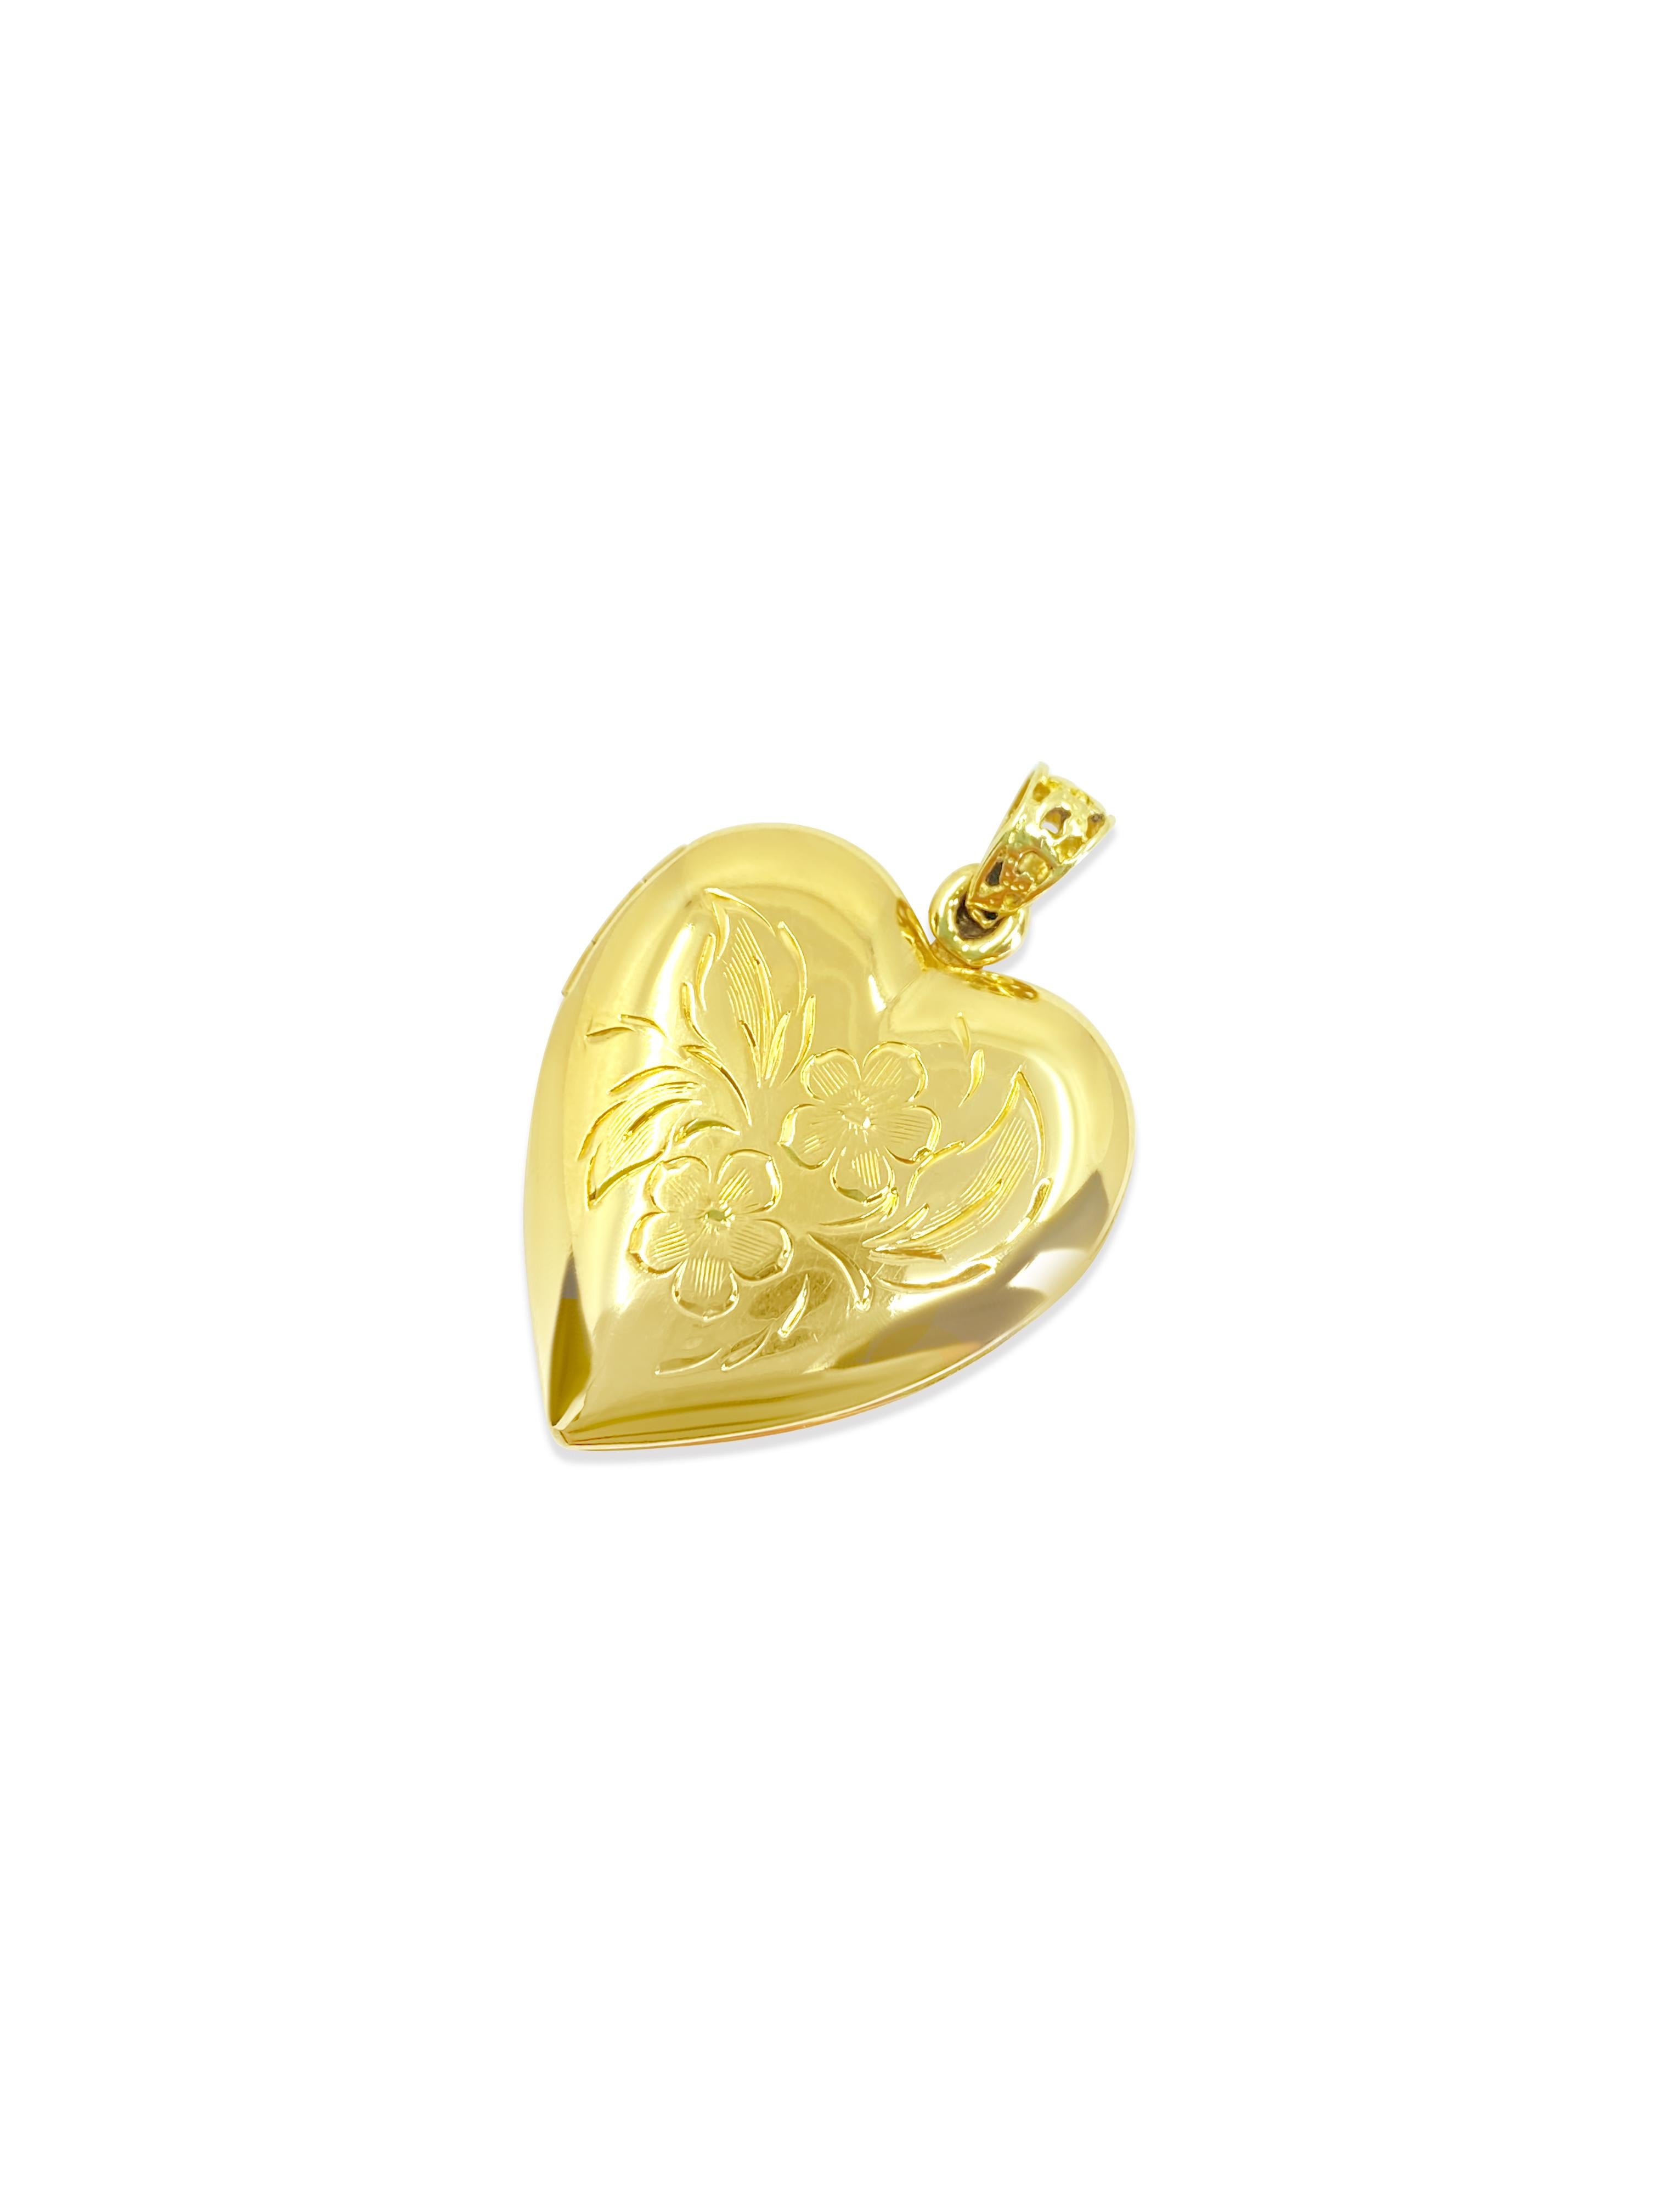 Women's Vintage Heart Picture Pendant For Her in 14k Gold  For Sale